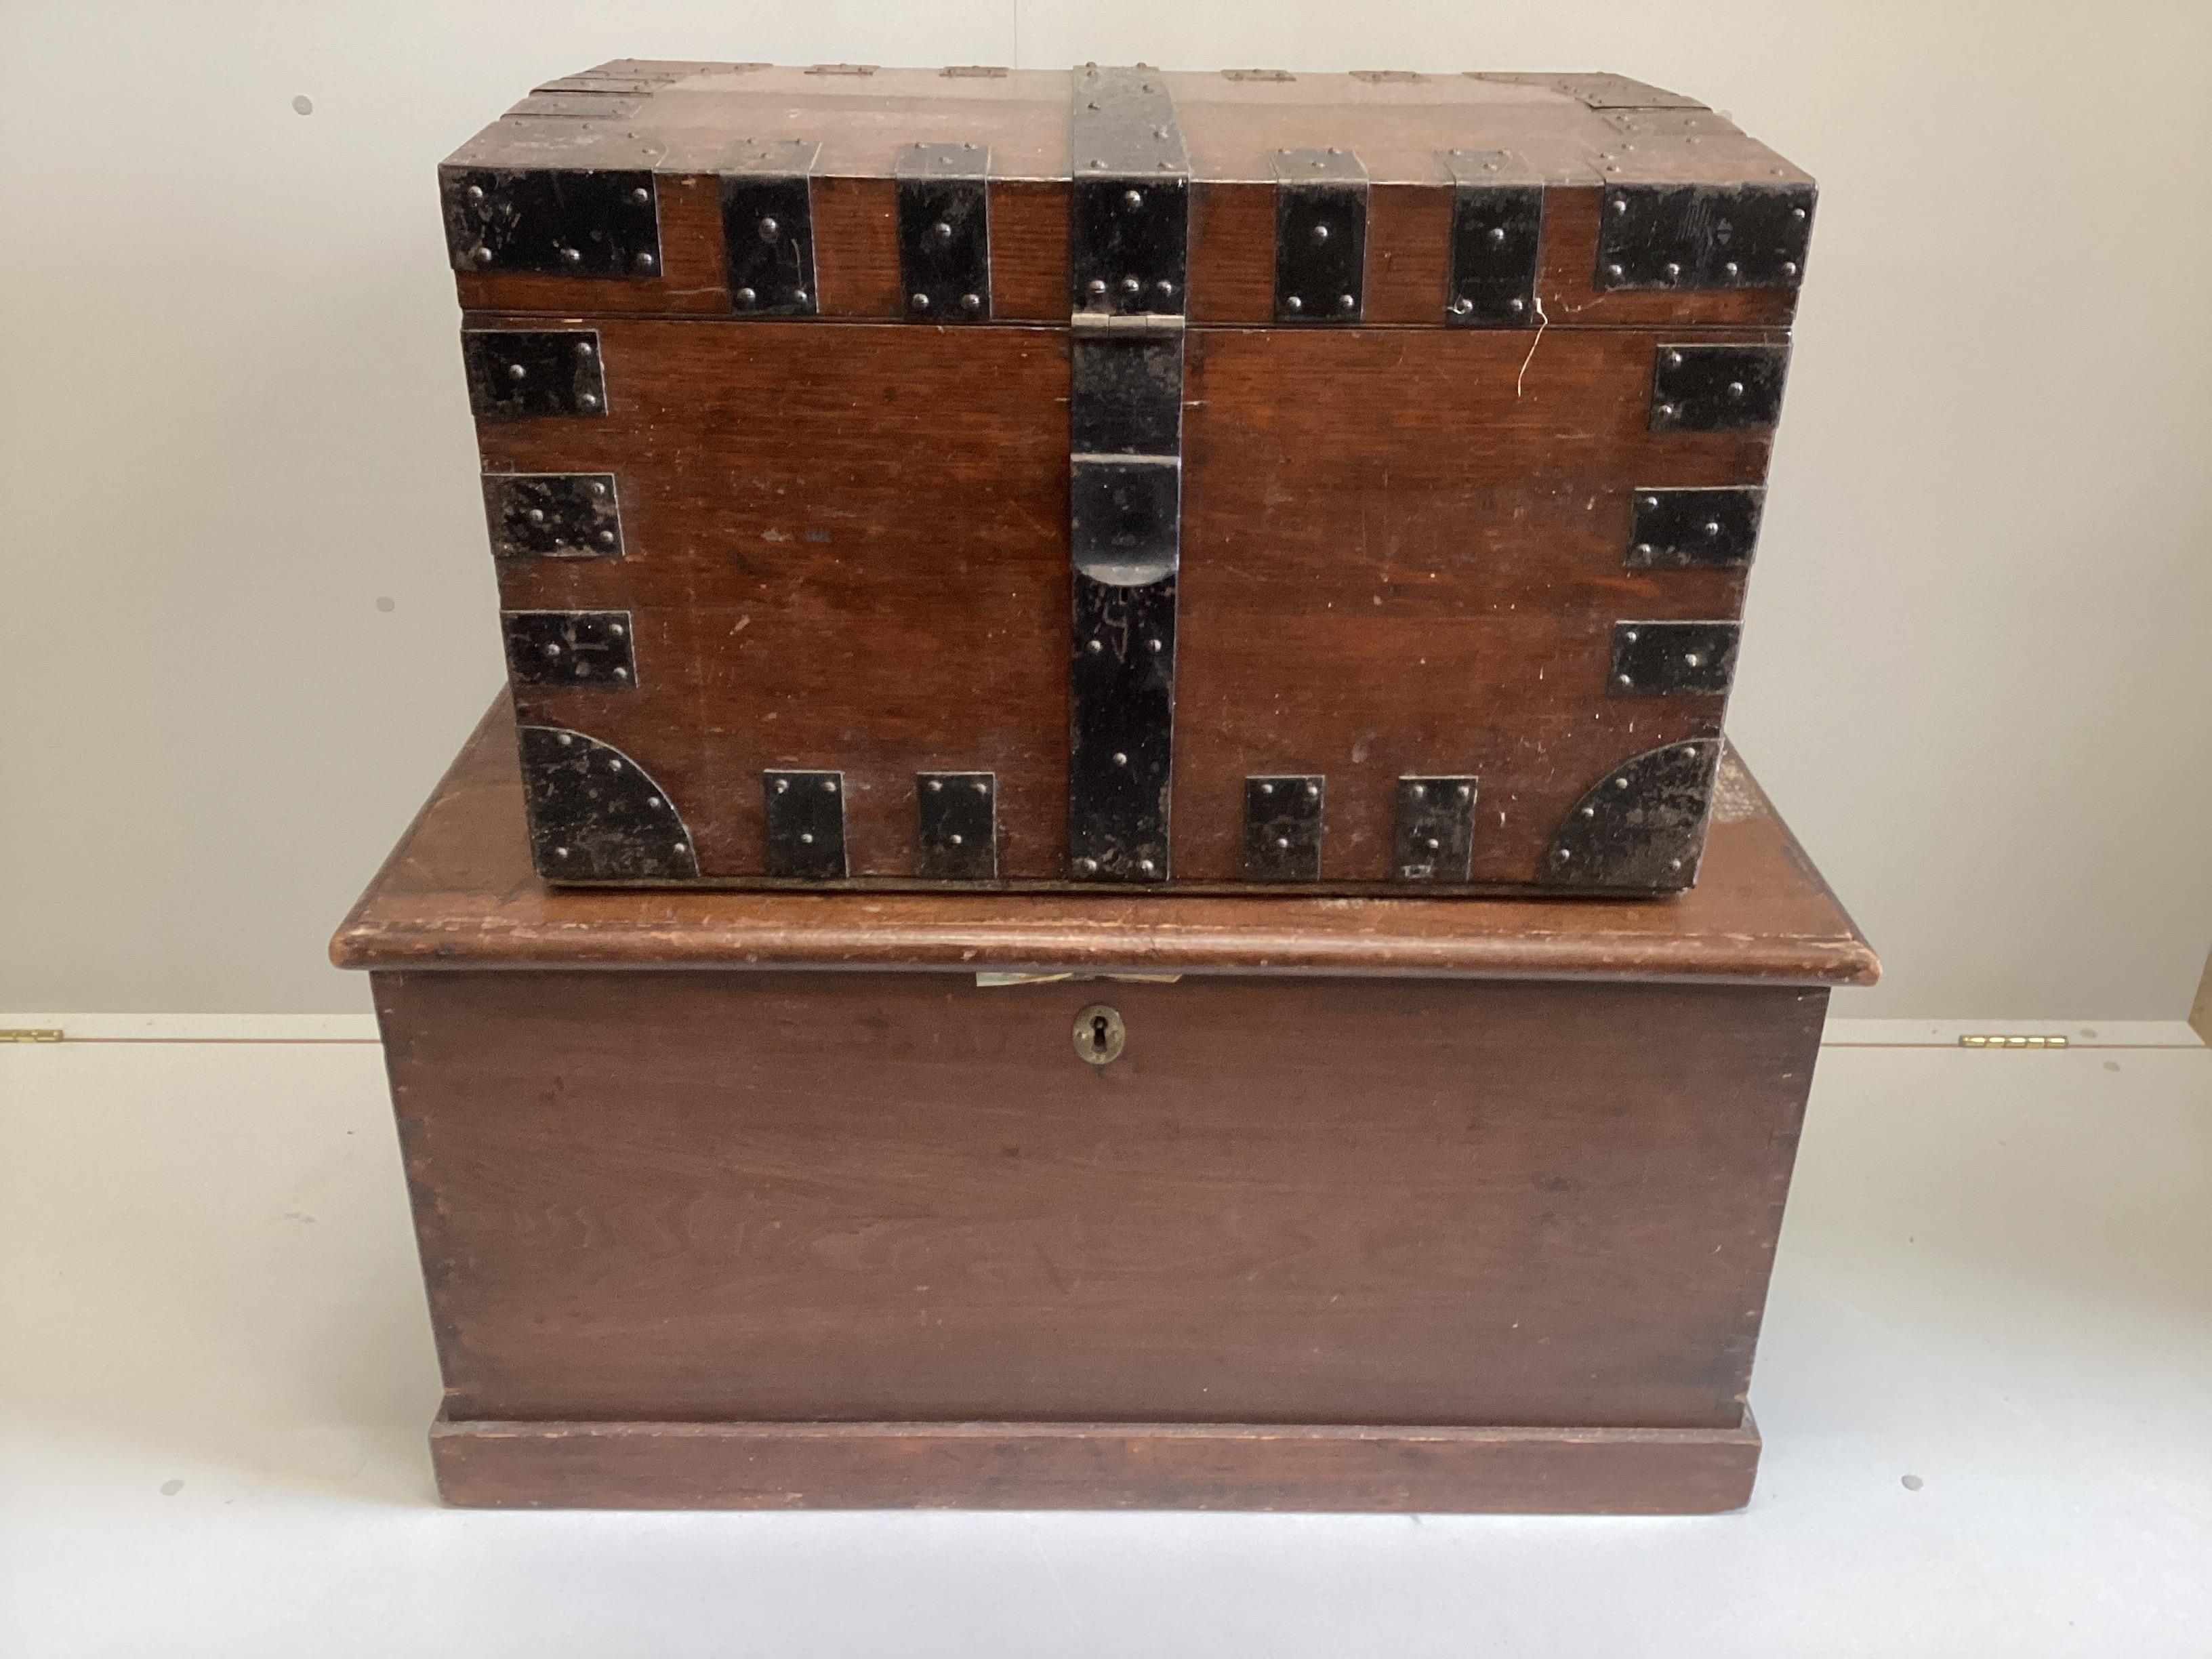 A Victorian iron bound oak silver chest, width 75cm, depth 47cm, height 46cm together with a larger Victorian stained pine trunk